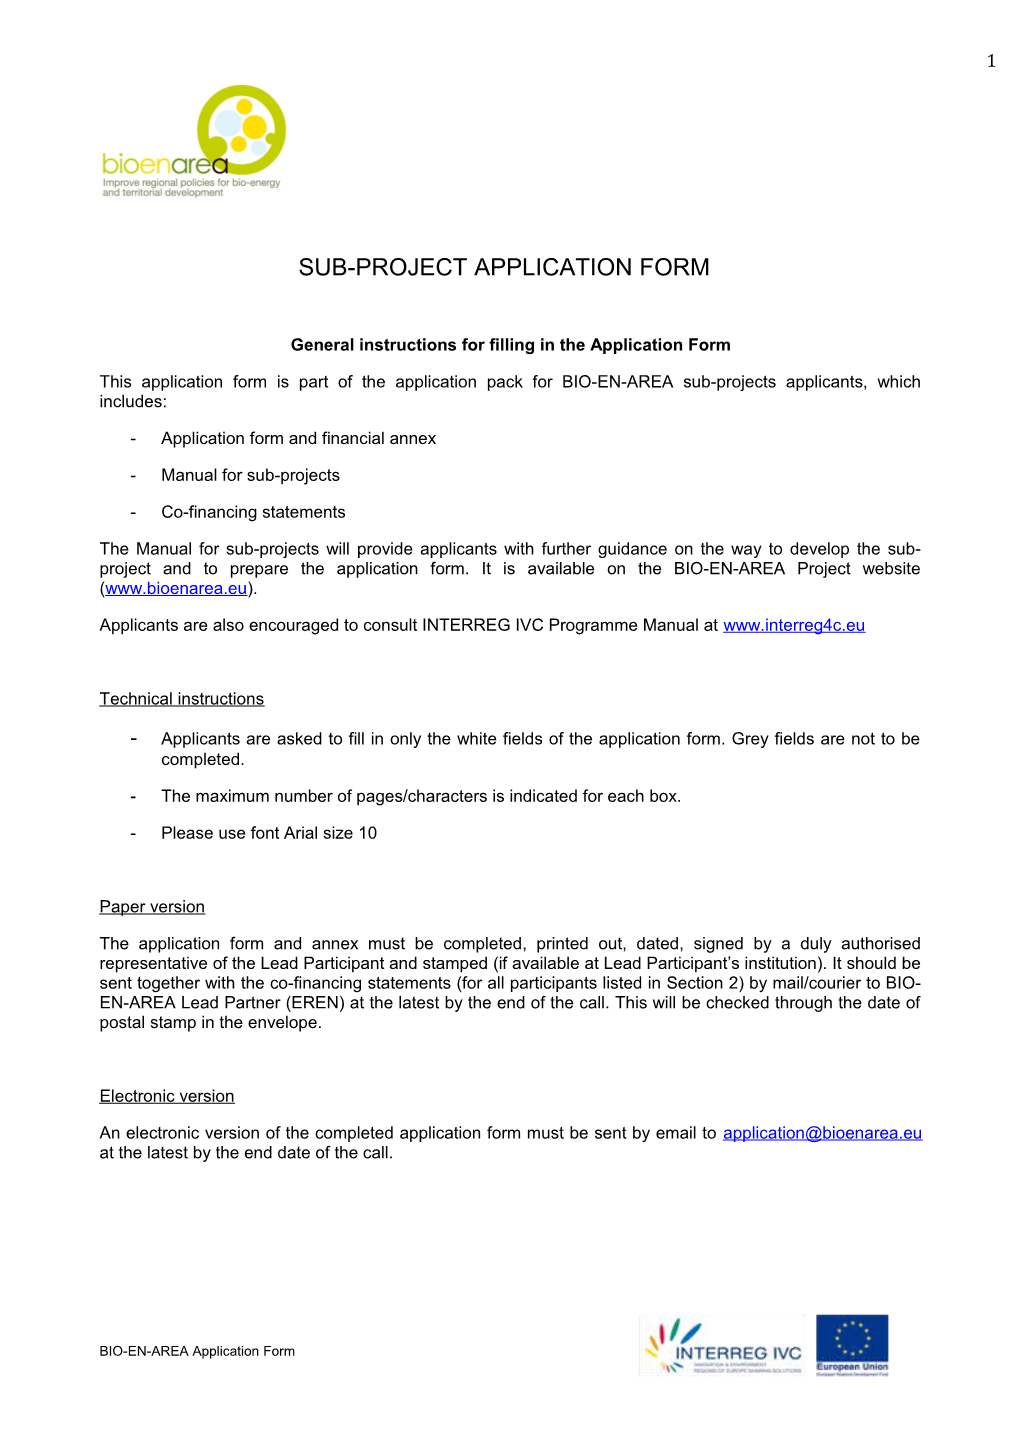 Sub-Project Application Form